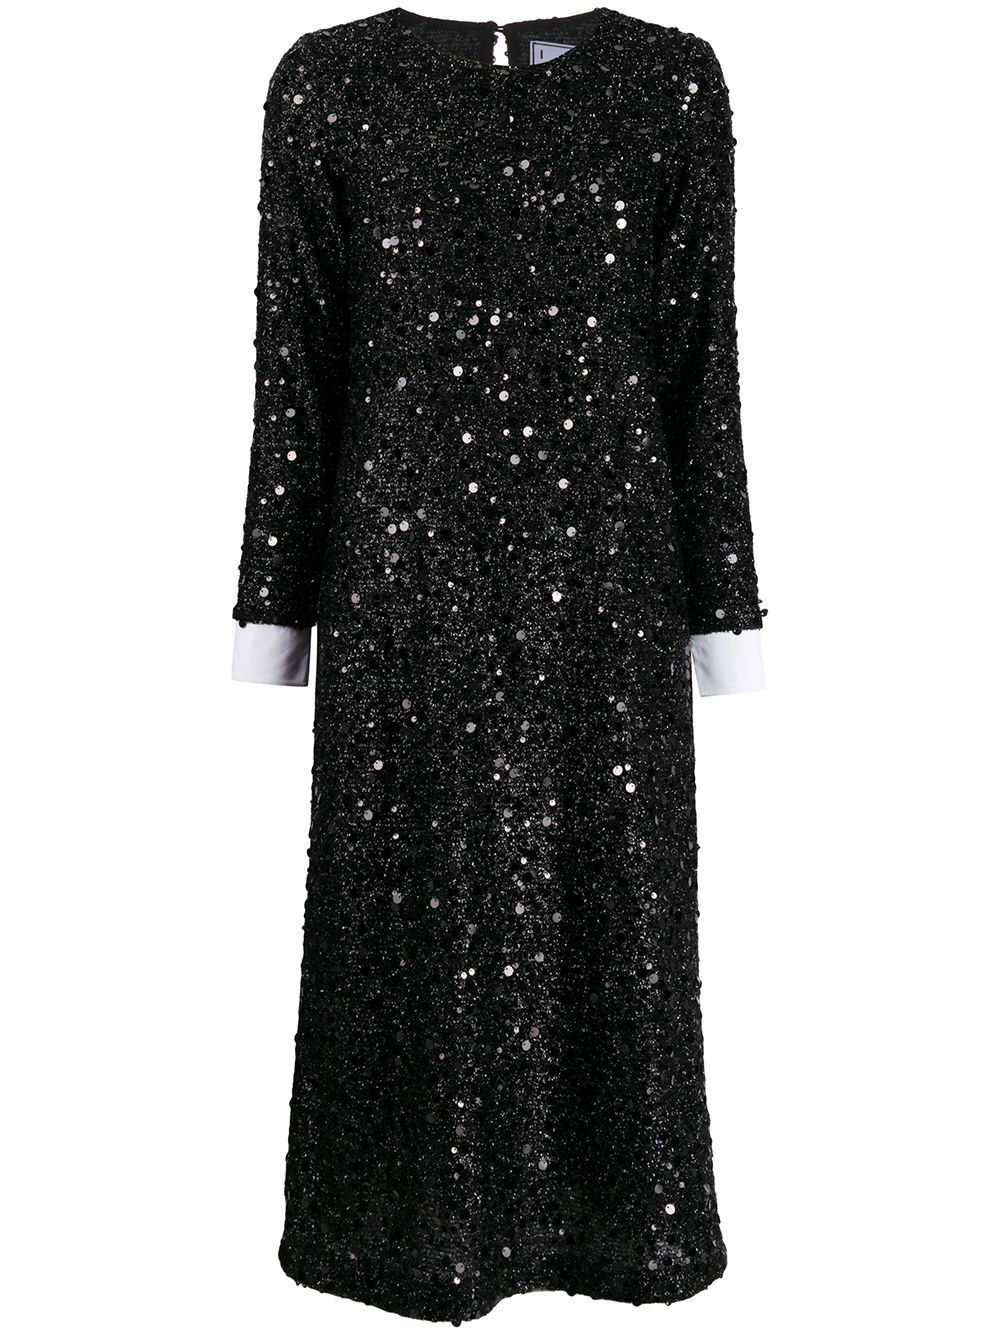 IN THE MOOD FOR LOVE SEQUIN SHIRT DRESS